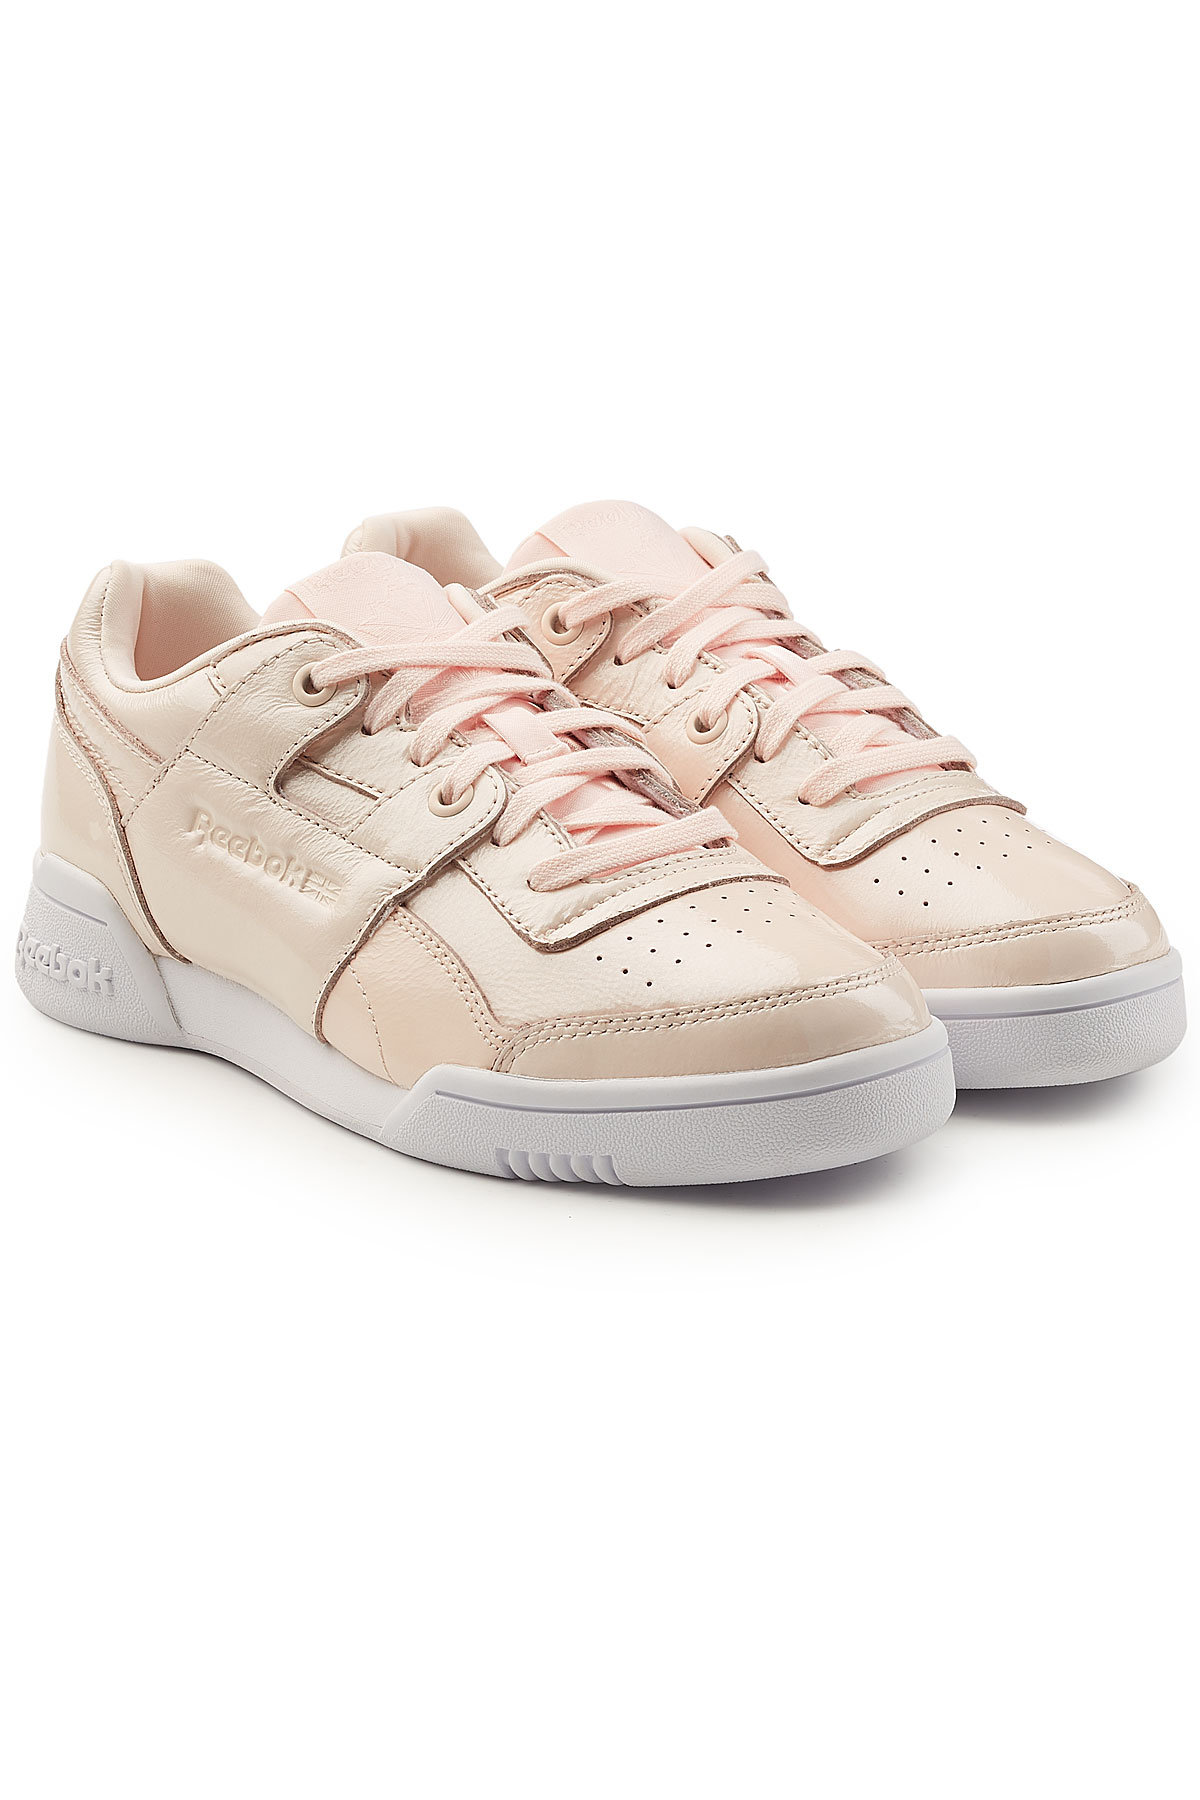 Workout Plus Patent Leather Sneakers by Reebok